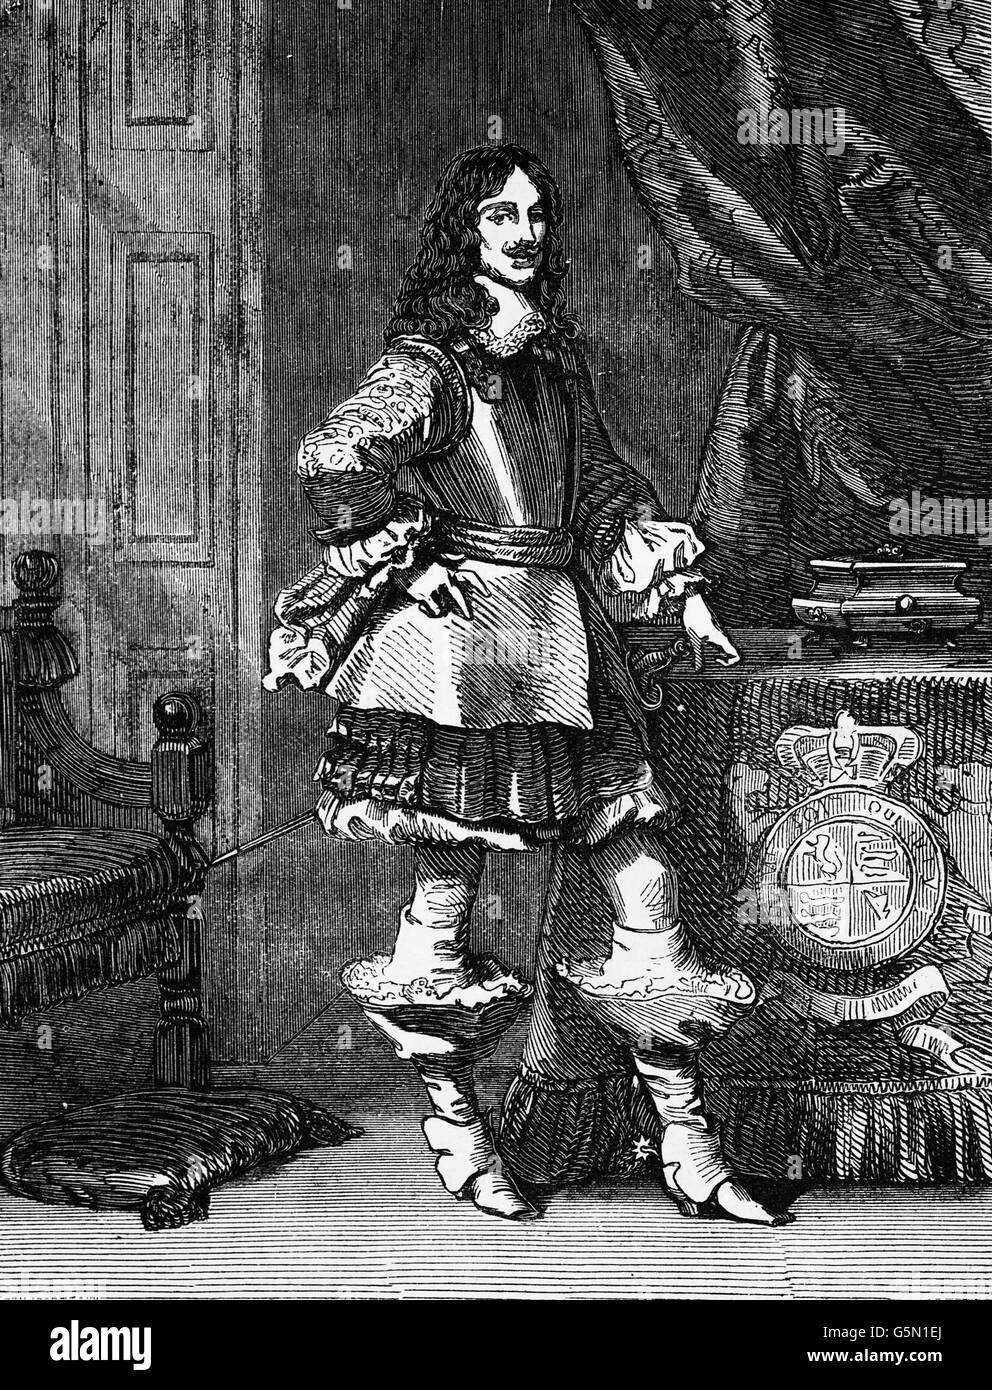 Charles II was restored as monarch of the three kingdoms of England, Scotland, and Ireland in 1660. His father, Charles I, was executed at Whitehall on 30 January 1649, at the climax of the English Civil War. Stock Photo